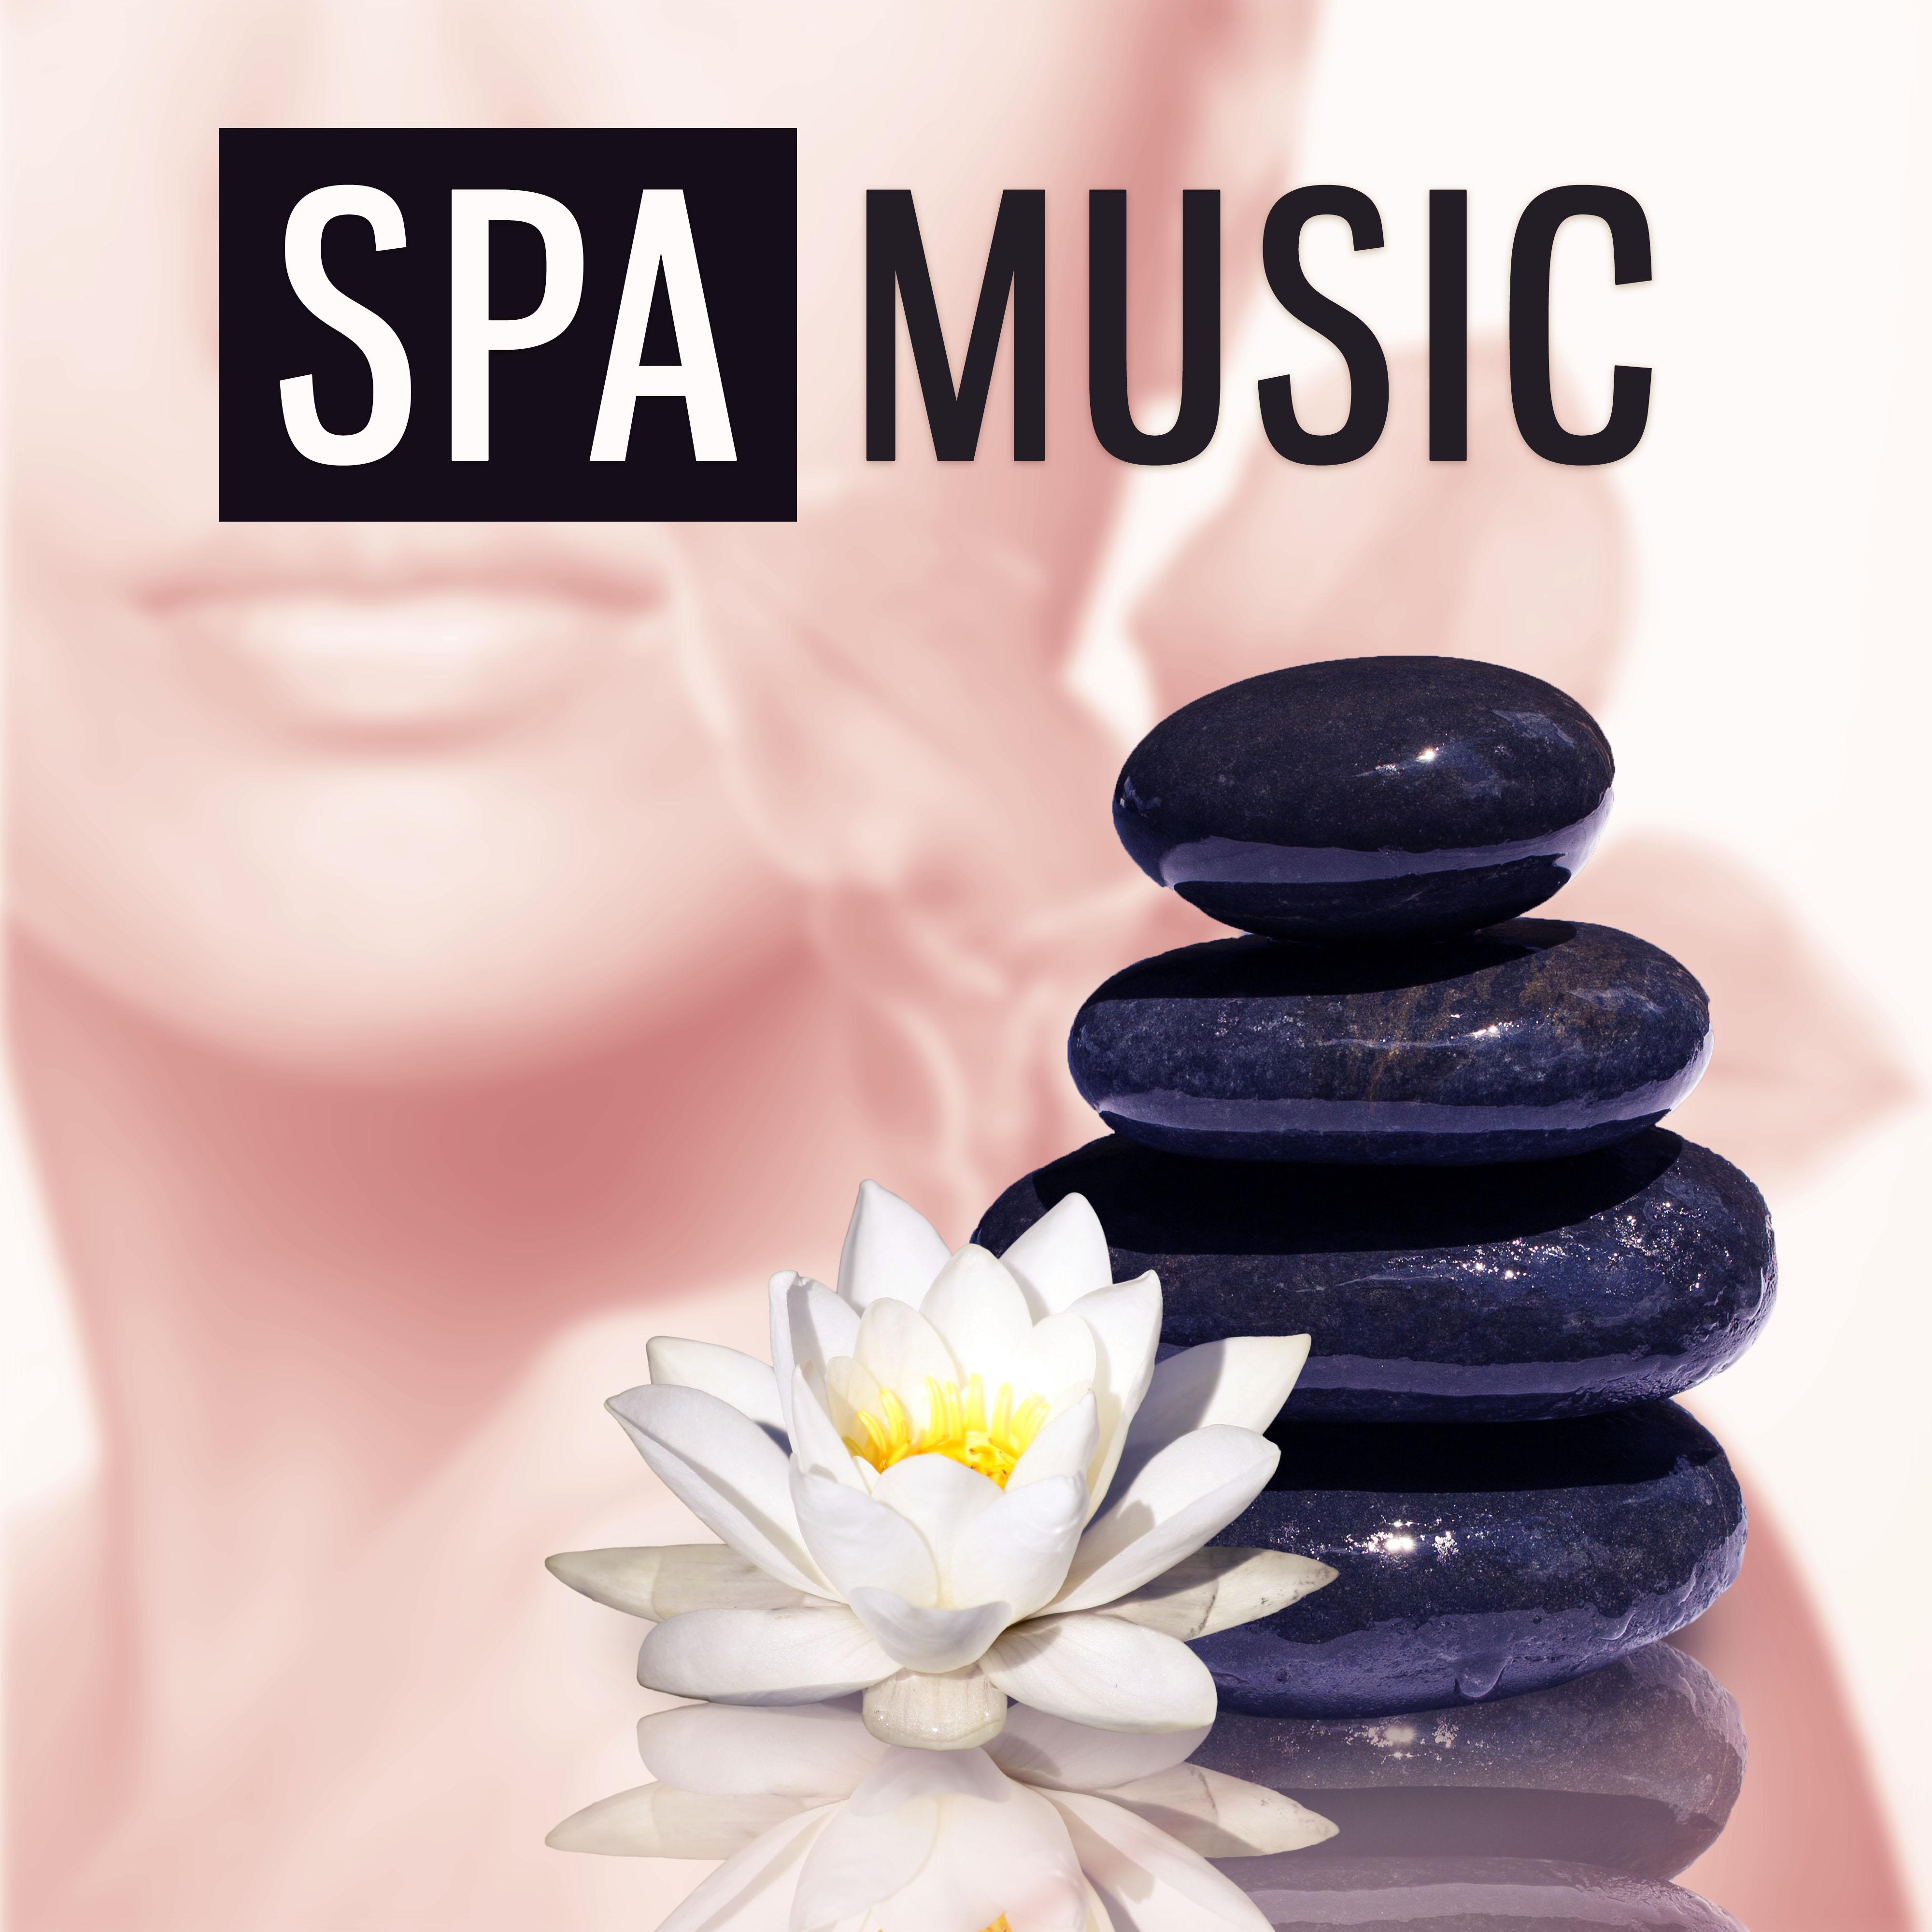 SPA Music  Beautiful Calming Nature Sounds for Deep Relaxation in Spa, Wellness, Music for Massage, Full Rest with New Age Music, Sounds of Birds  Ocean Waves